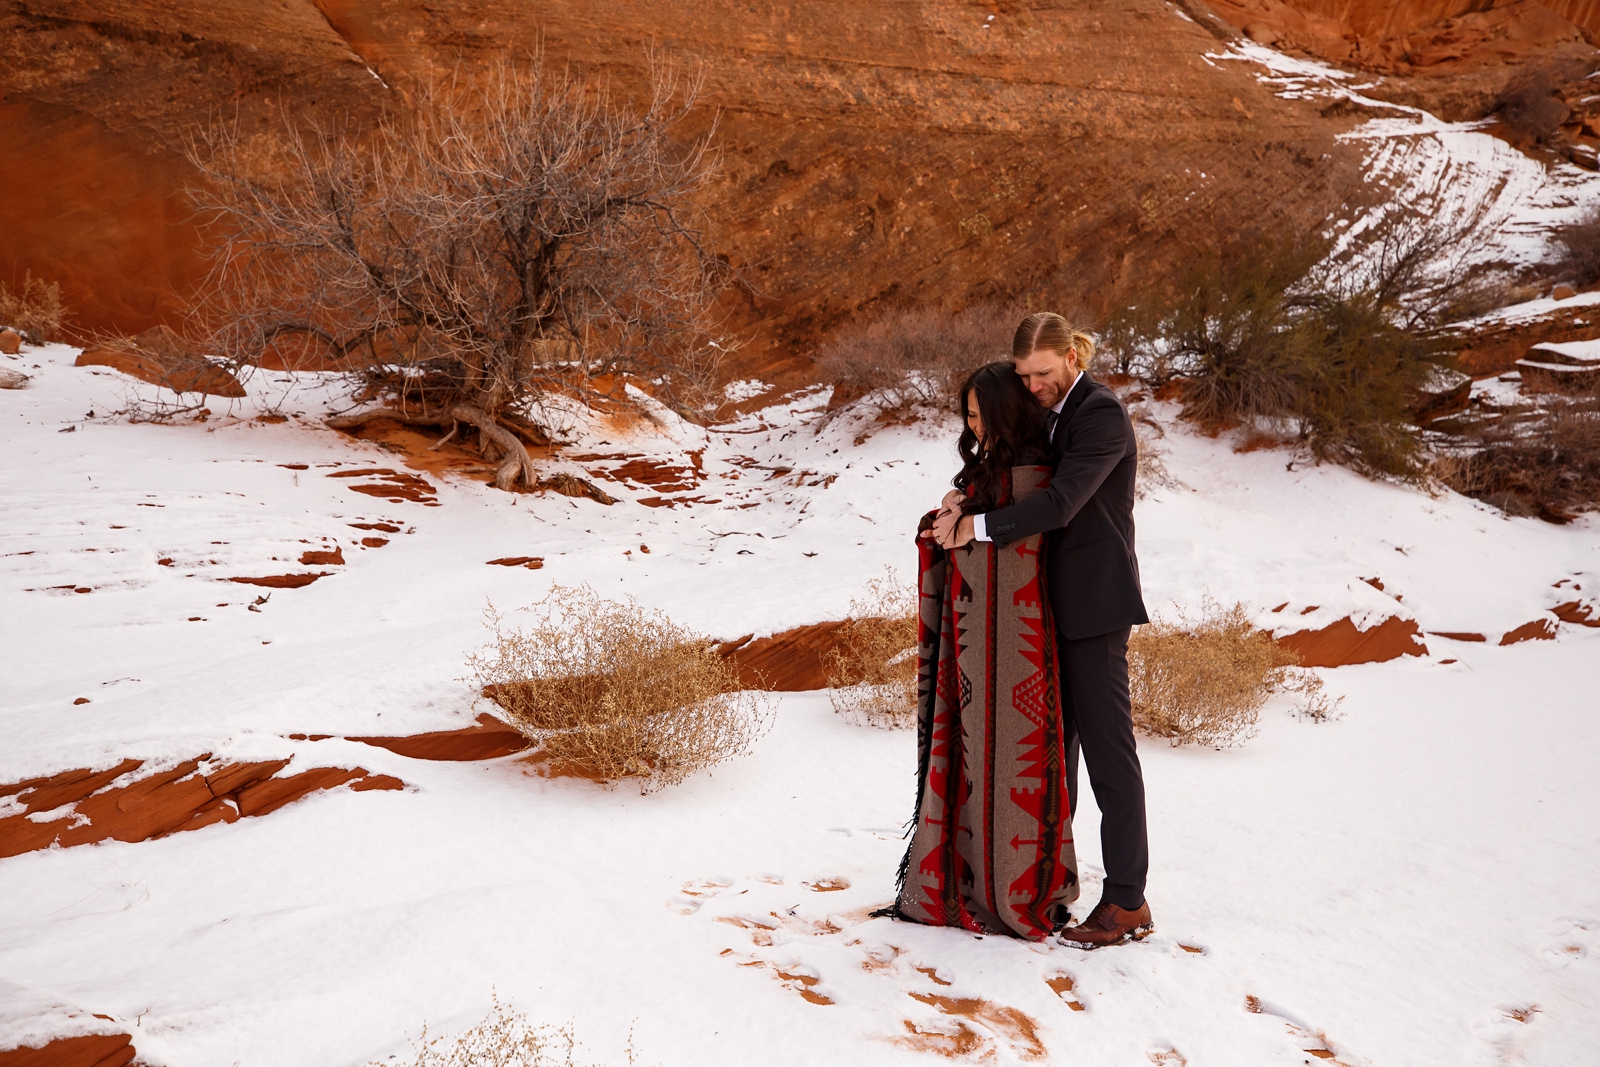 Couple cuddling under a blanket in a snowy slot canyon.